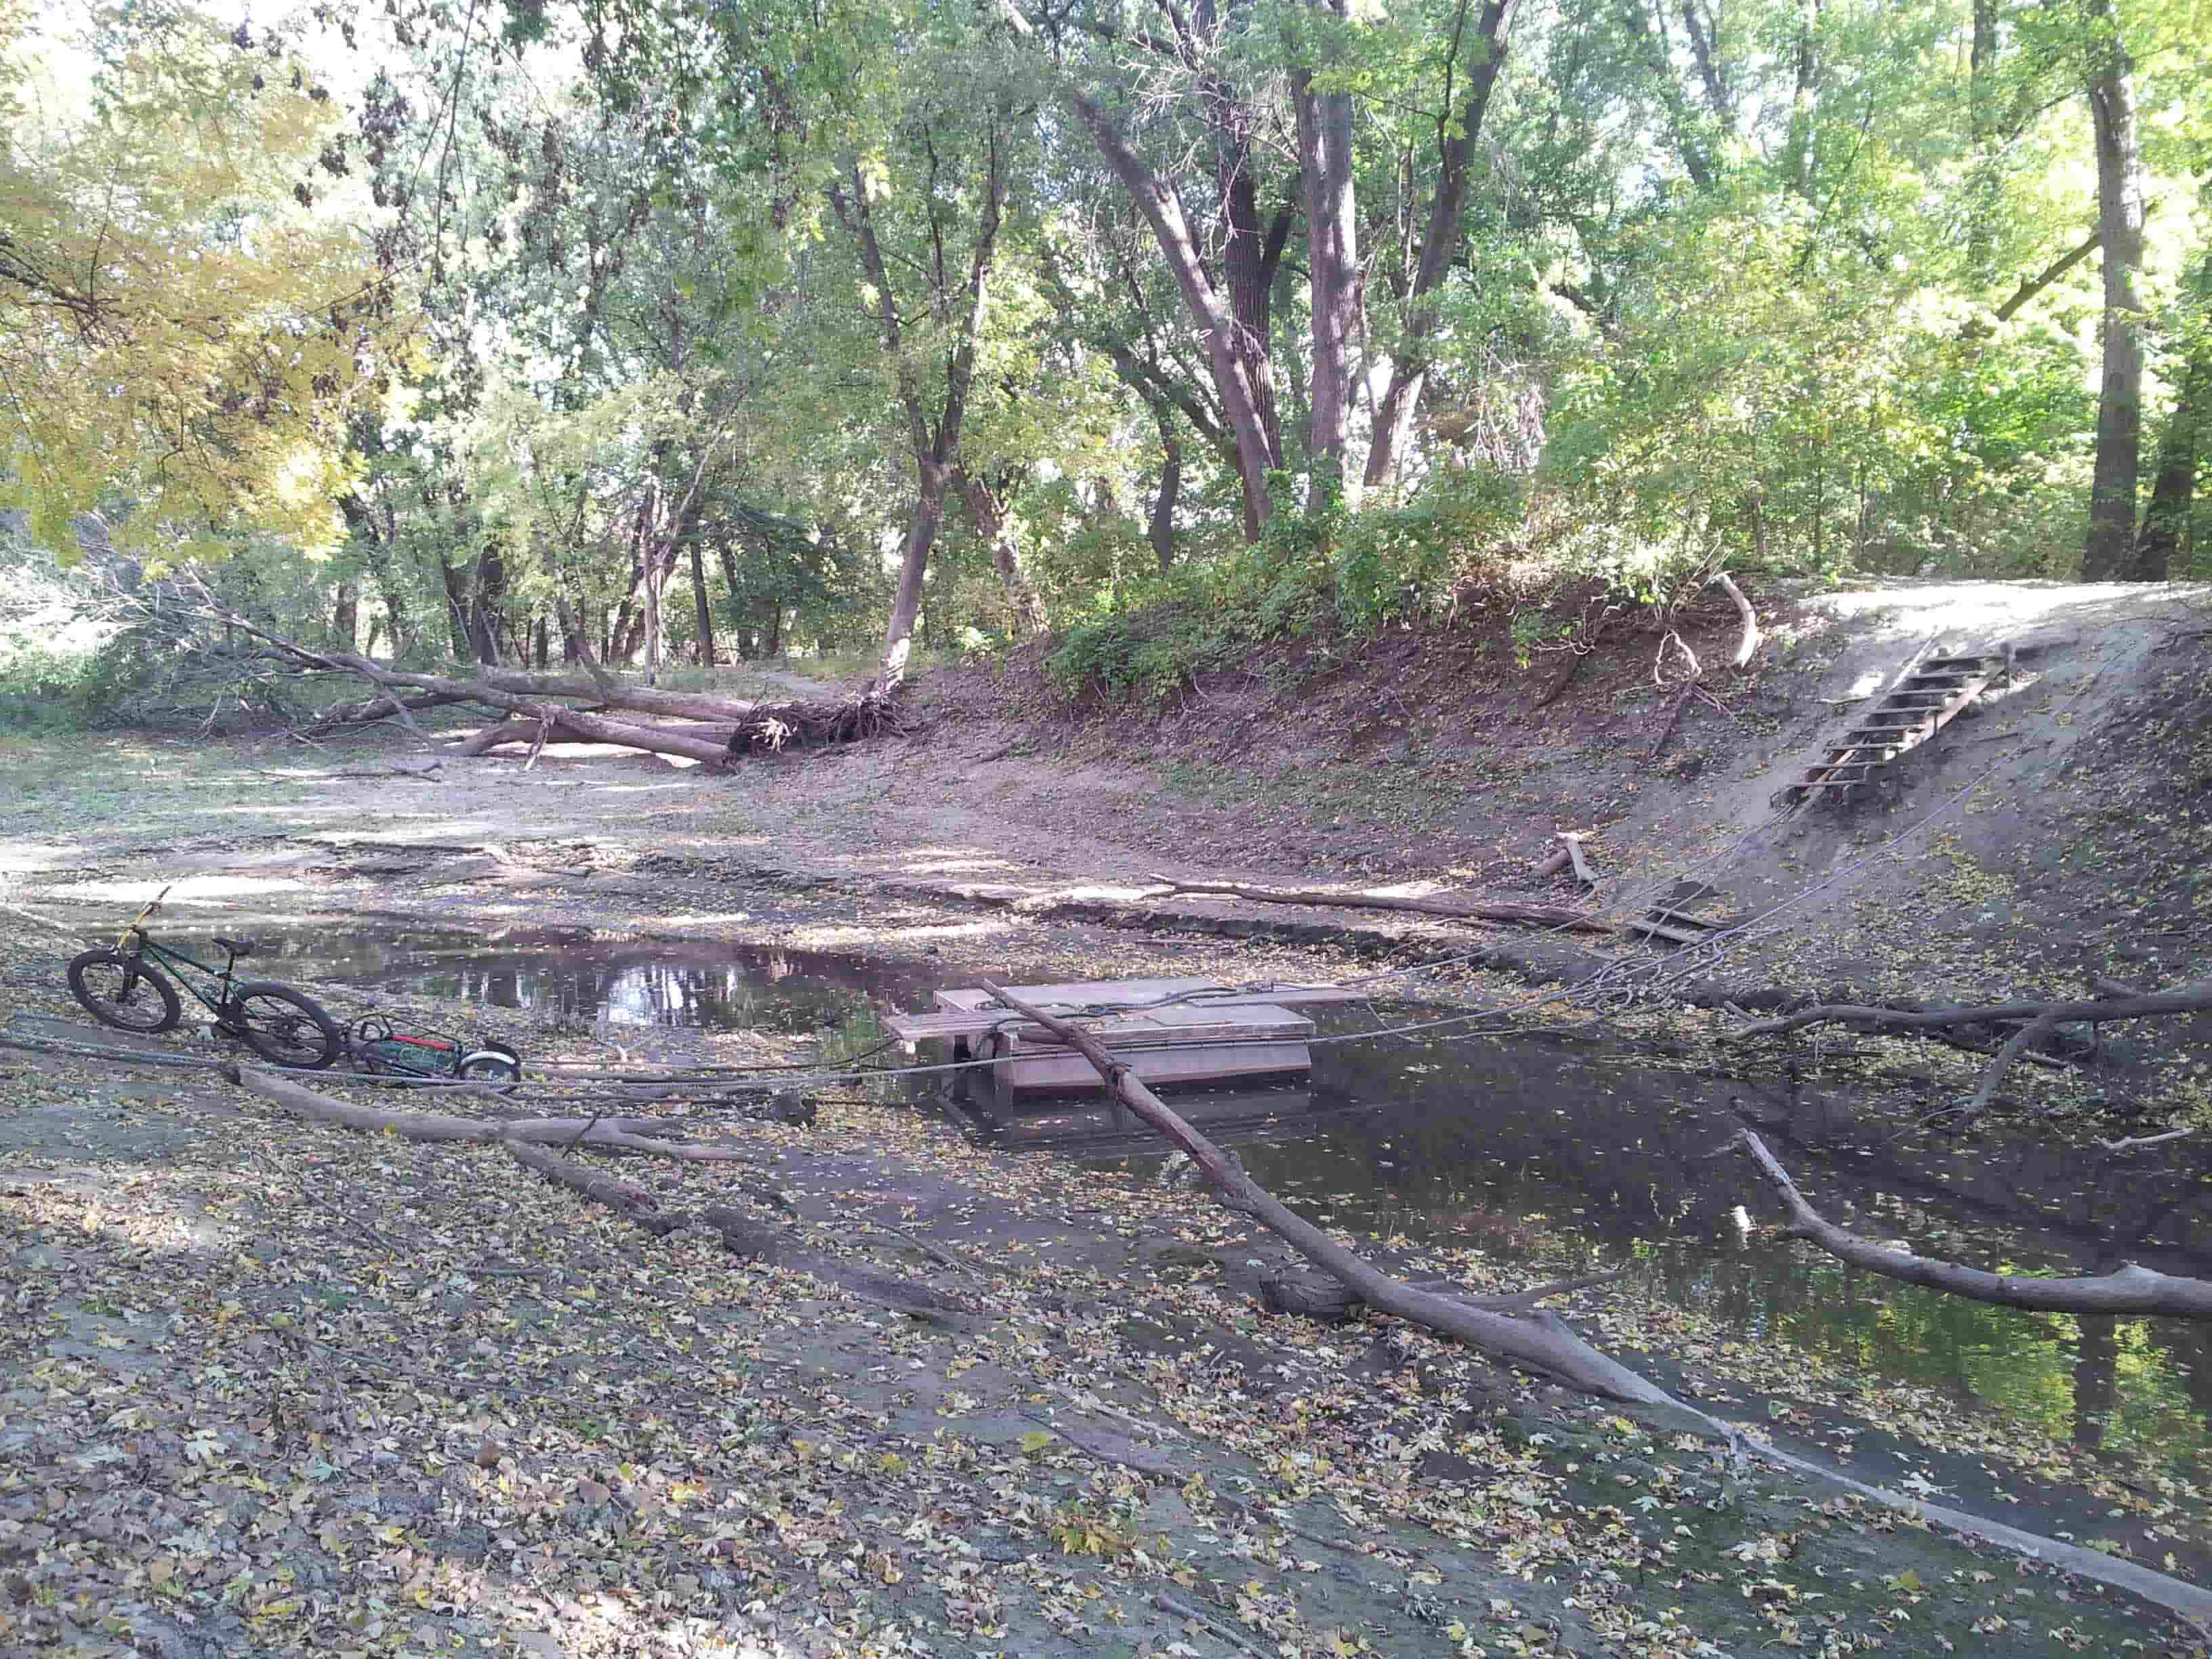 Left side view of a bike on a dirt bank, next to a river with a wood deck raft in the middle, in the green woods